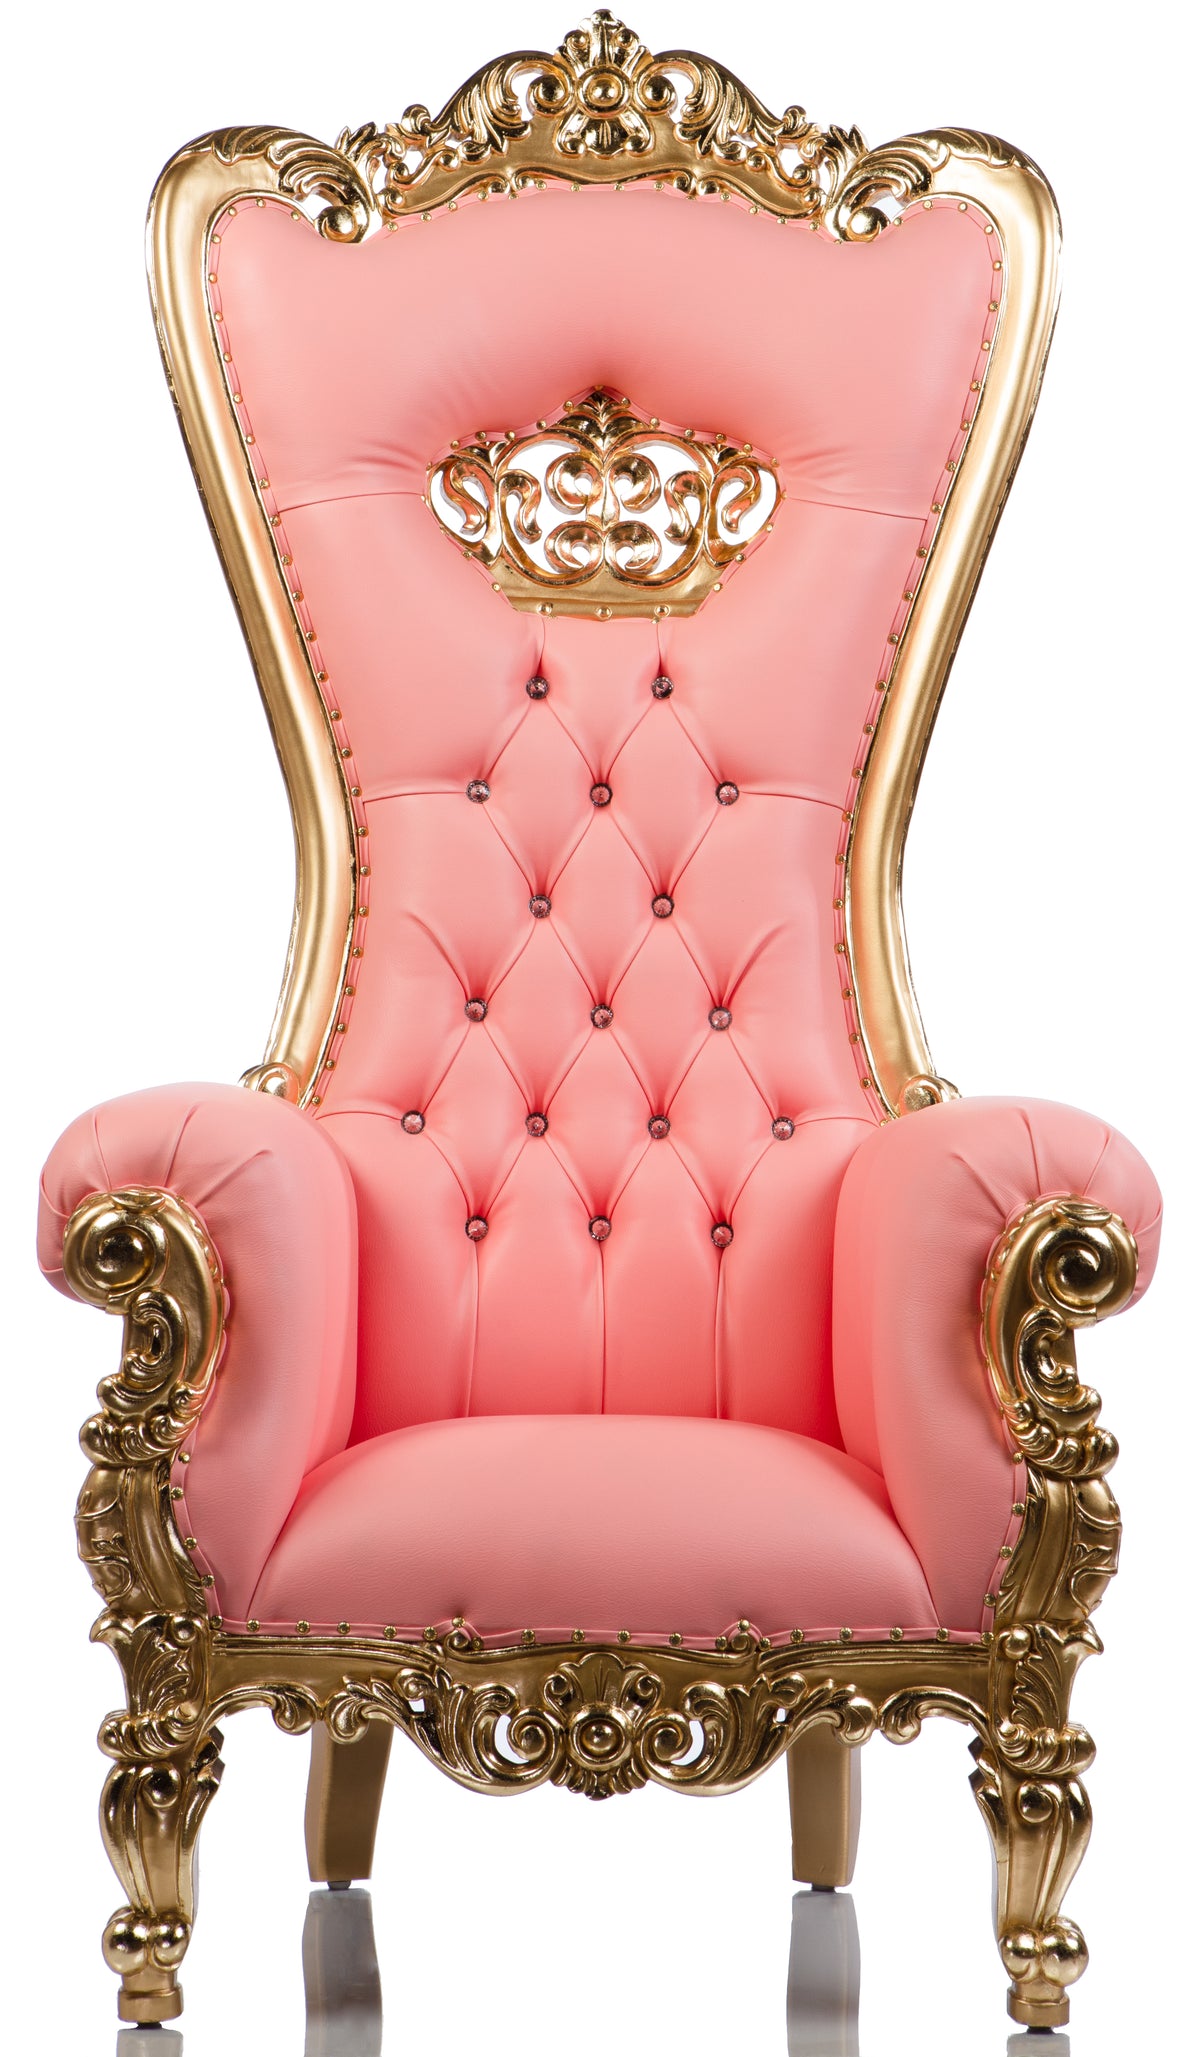 Vintage "Crowned Bubble Gum" Shellback throne Pink/Gold (West Coast)